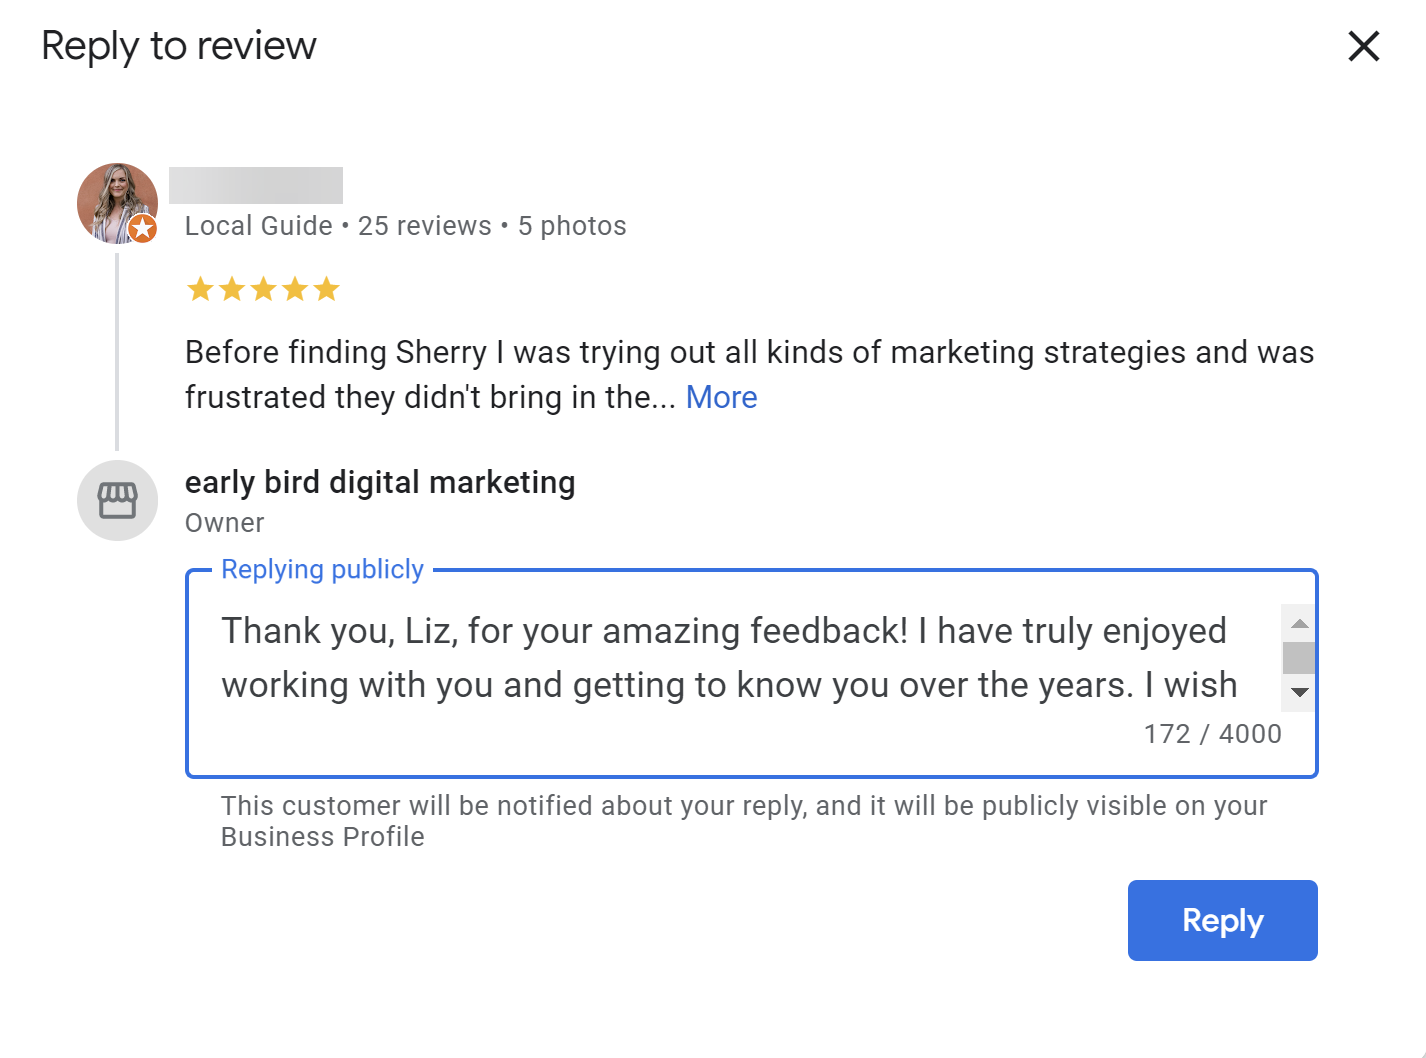 Replying to a review in search